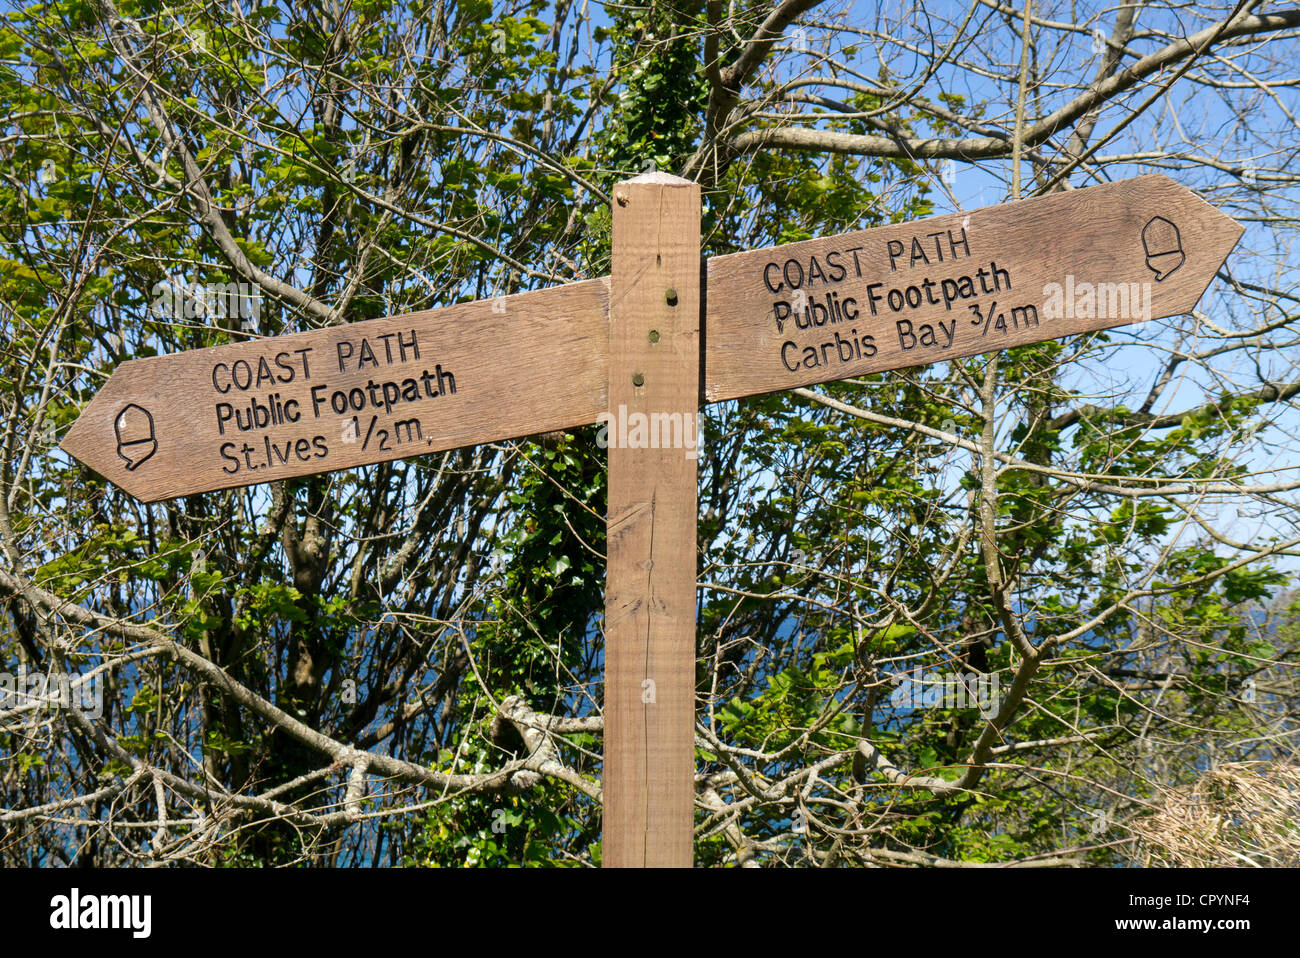 Cornwall coast path wooden sign pointing to St. Ives and Carbis Bay. Stock Photo